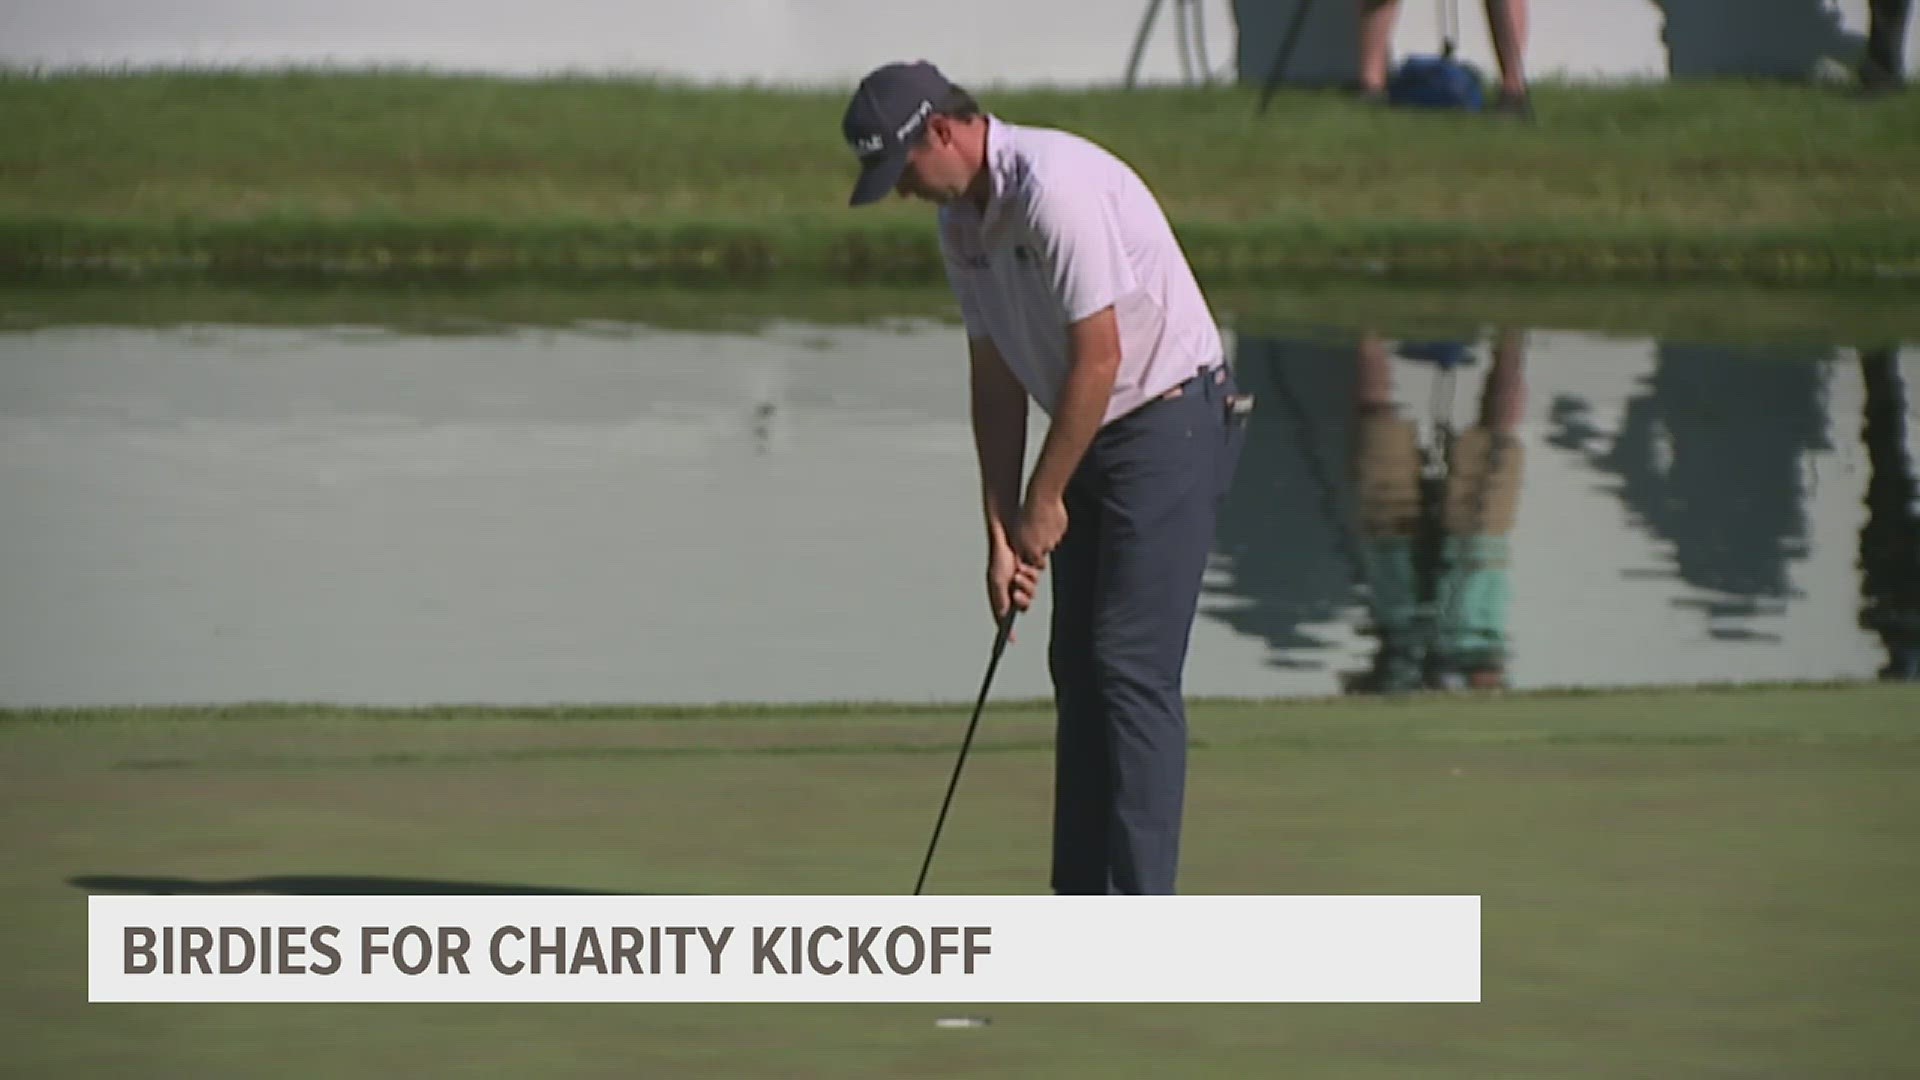 In 2022 Birdies for Charity raised a record $13.9 million for 481 charities in the Quad Cities region. Here's how you can help expand their impact.